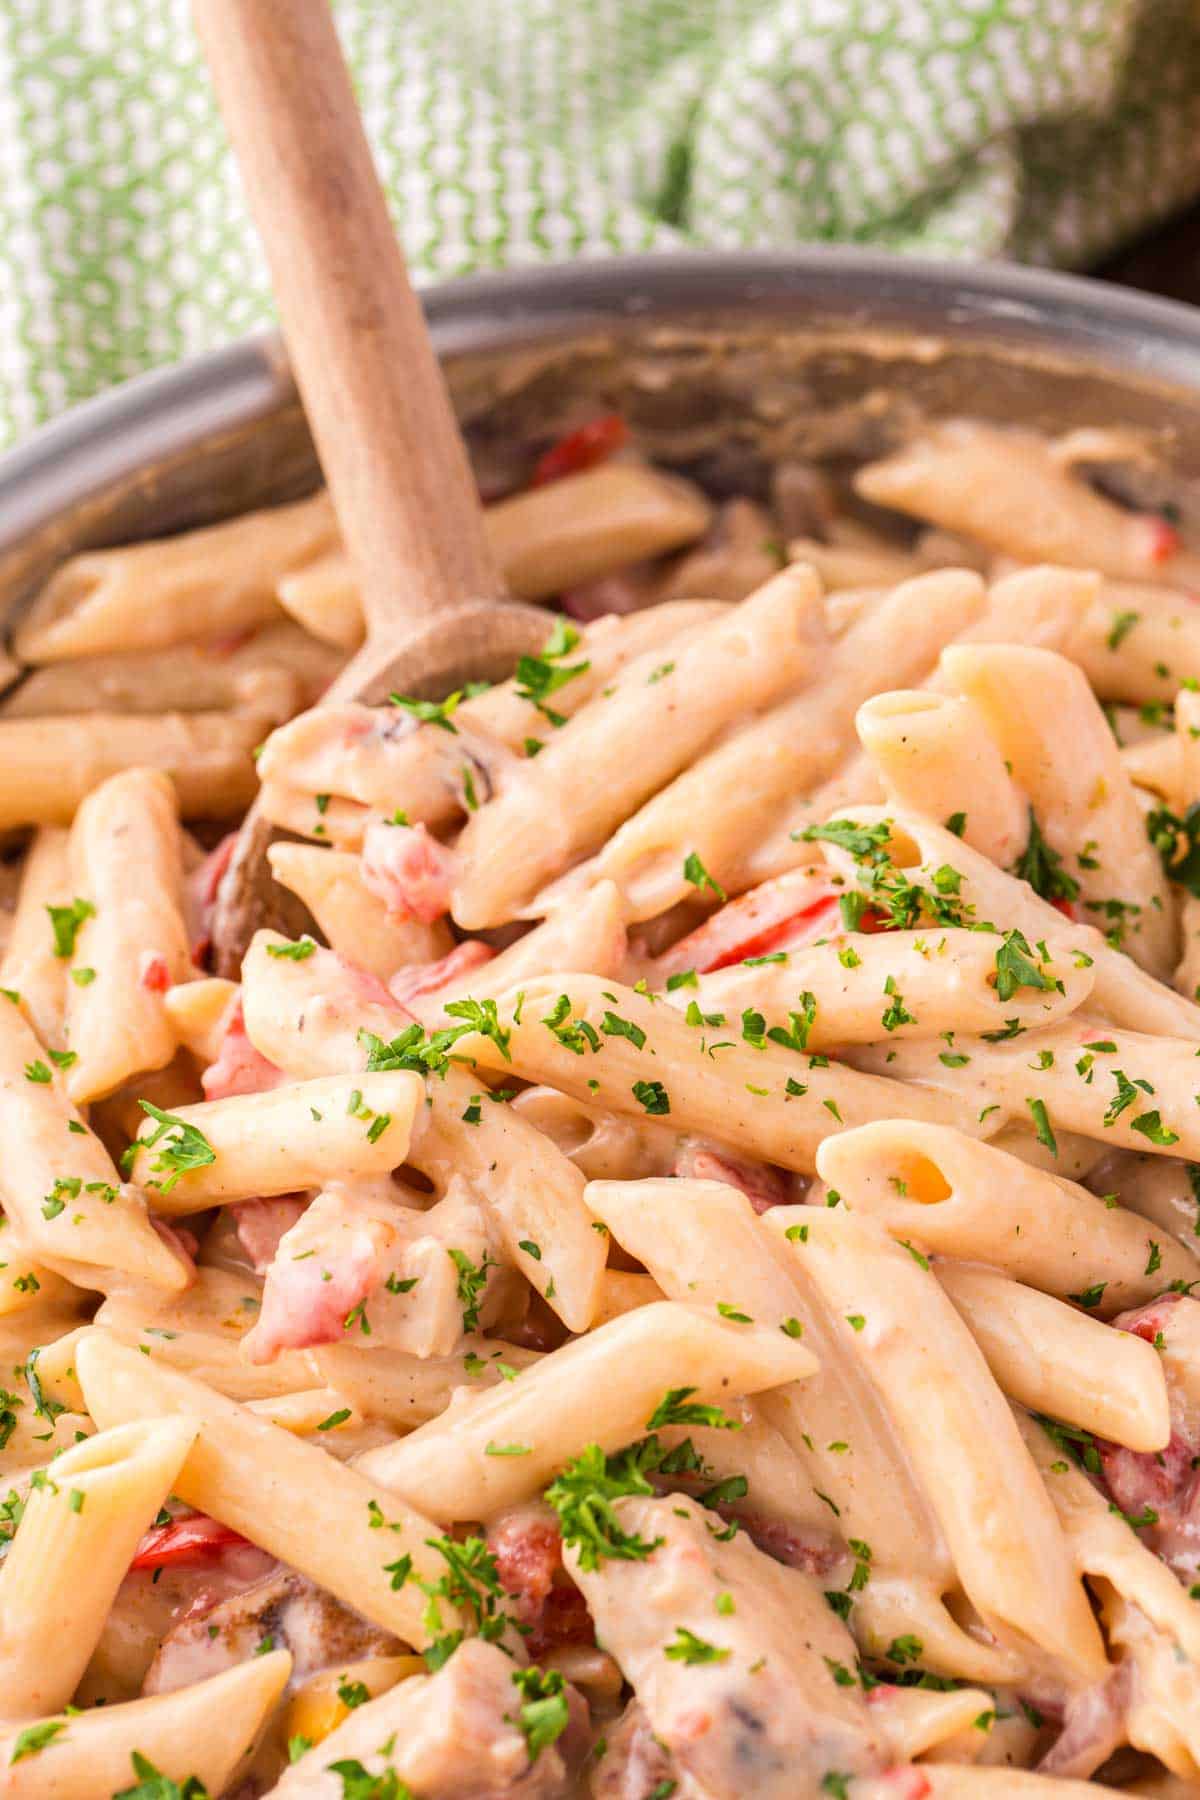 Creamy Chicken Fajita Pasta is a hearty pasta recipe loaded with chicken breast strips, sliced bell peppers, fajita seasoning, fire-roasted Rotel, penne noodles and pepper jack cheese.